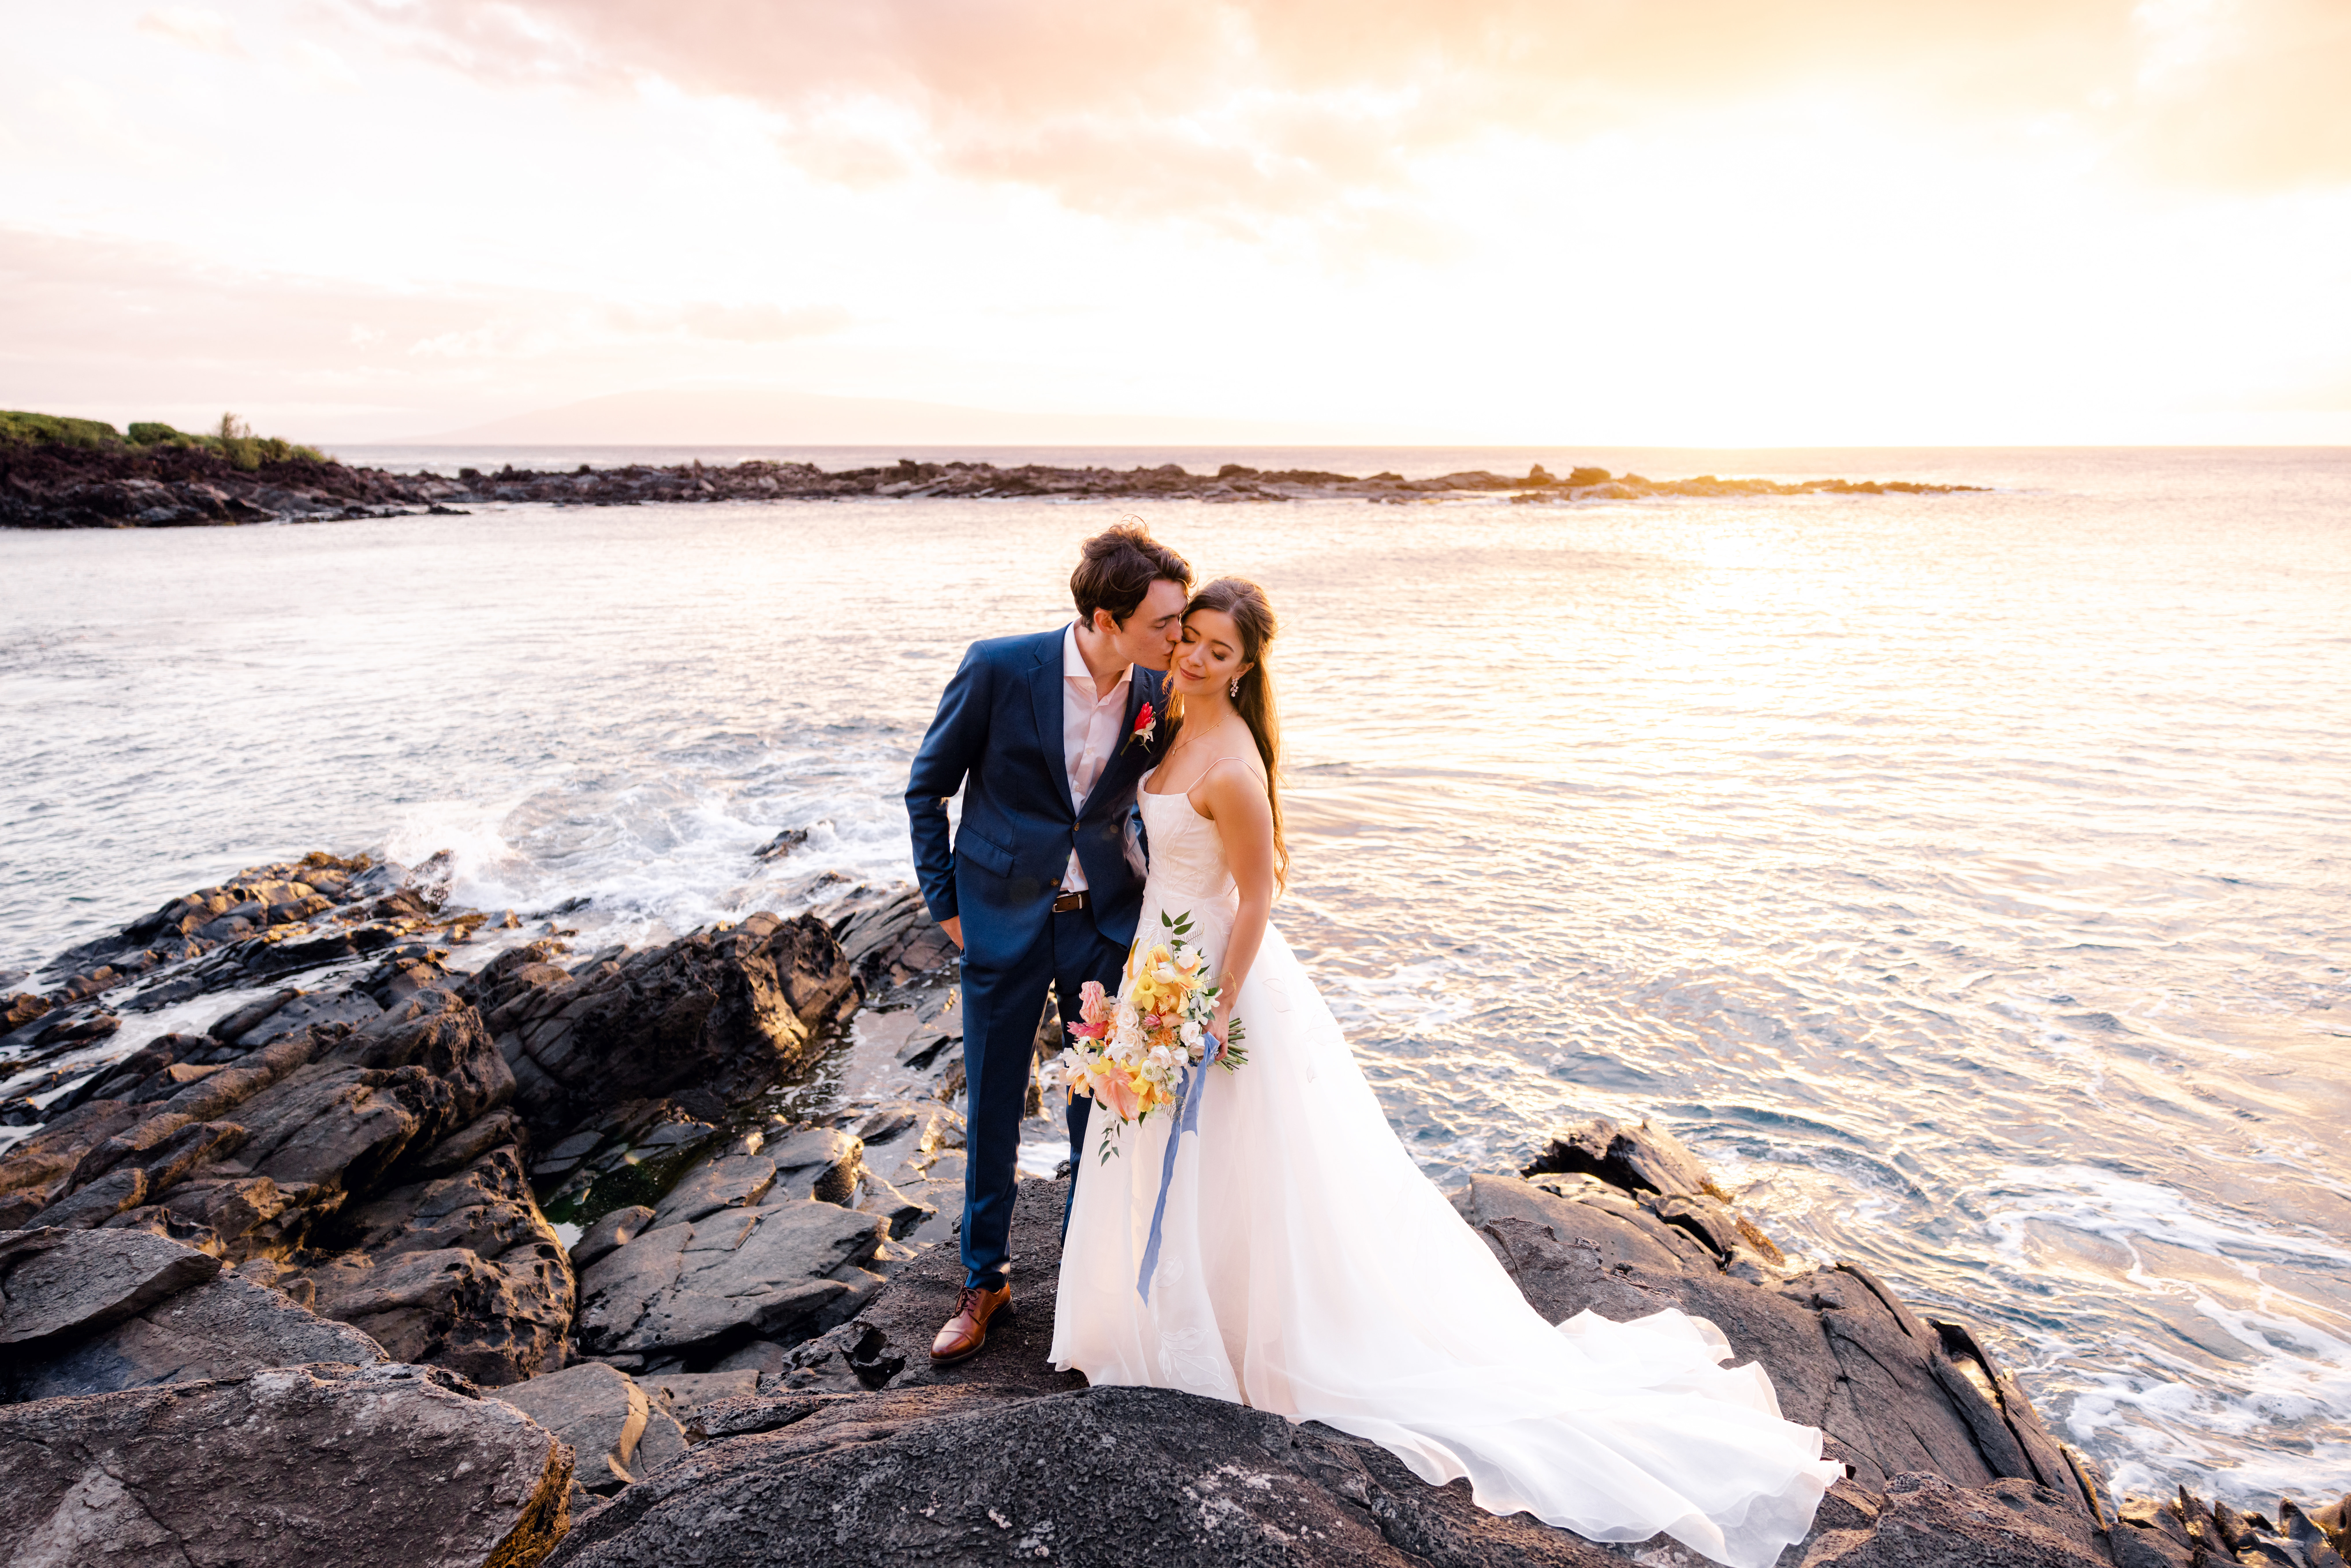 Intimate portraits of Groom kissing bride during sunset